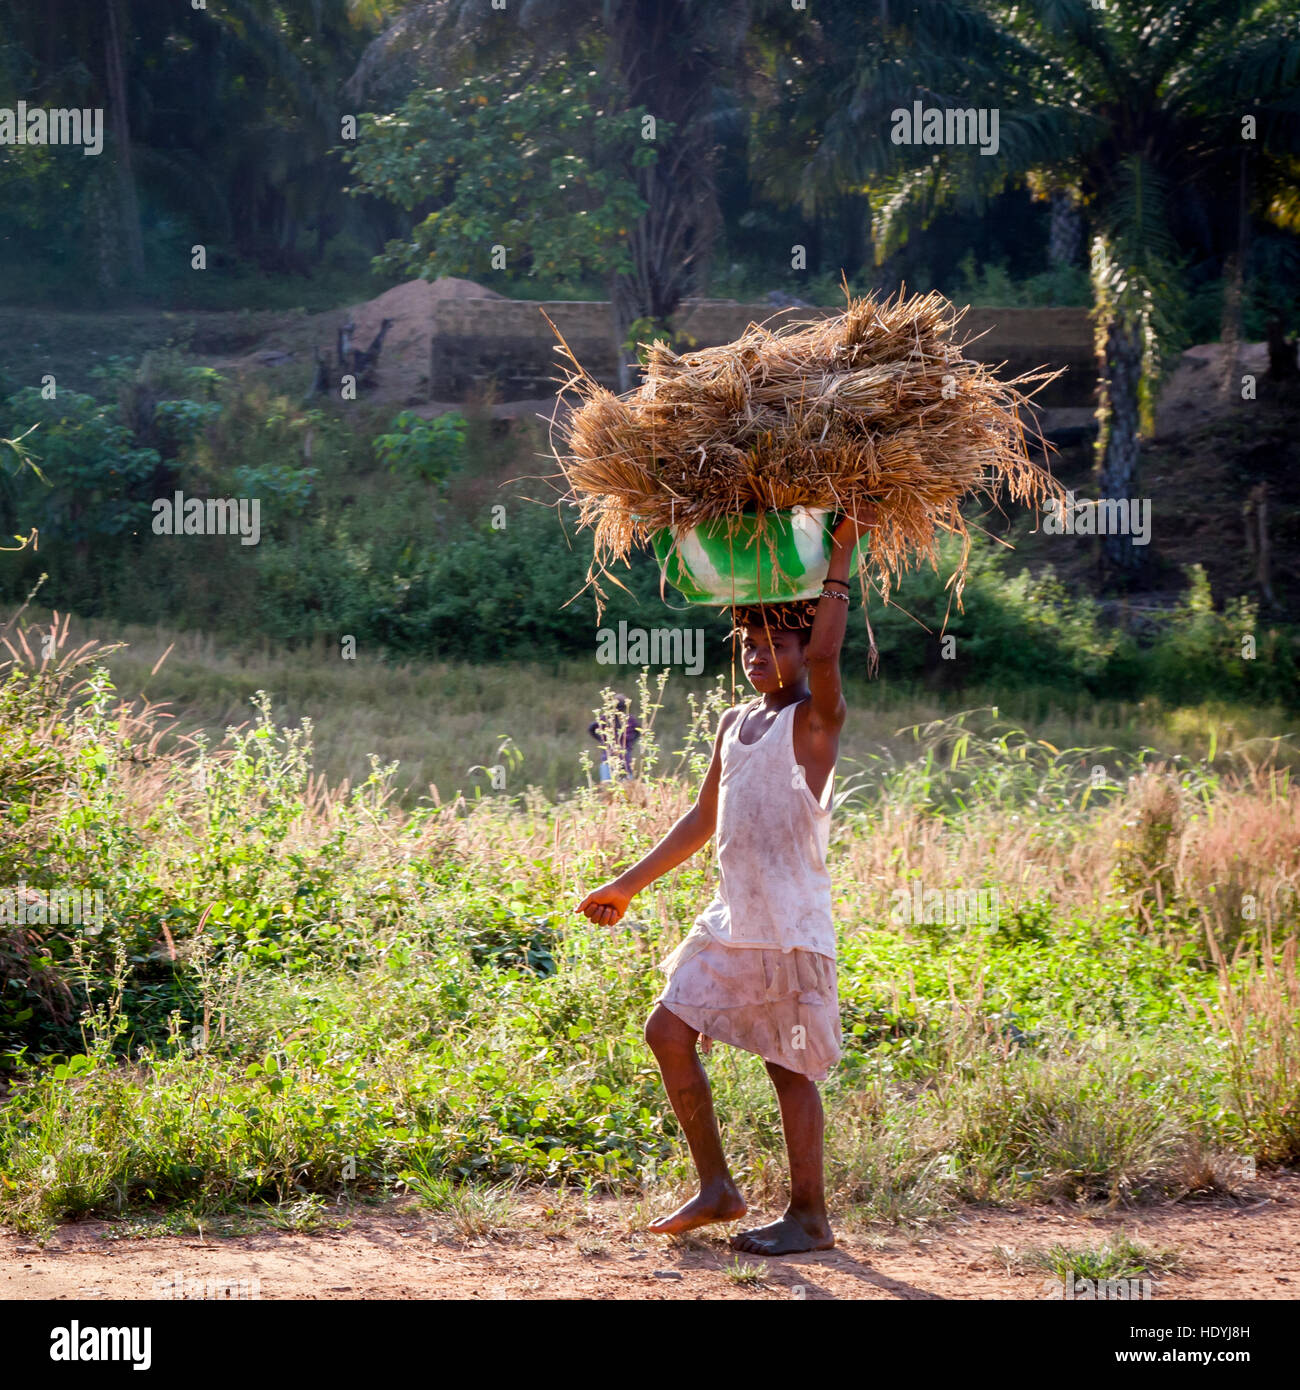 African girl carrying rice on her head. Children work in Sierra Leone. For example, they fetch rice from the fields over long distances. Stock Photo